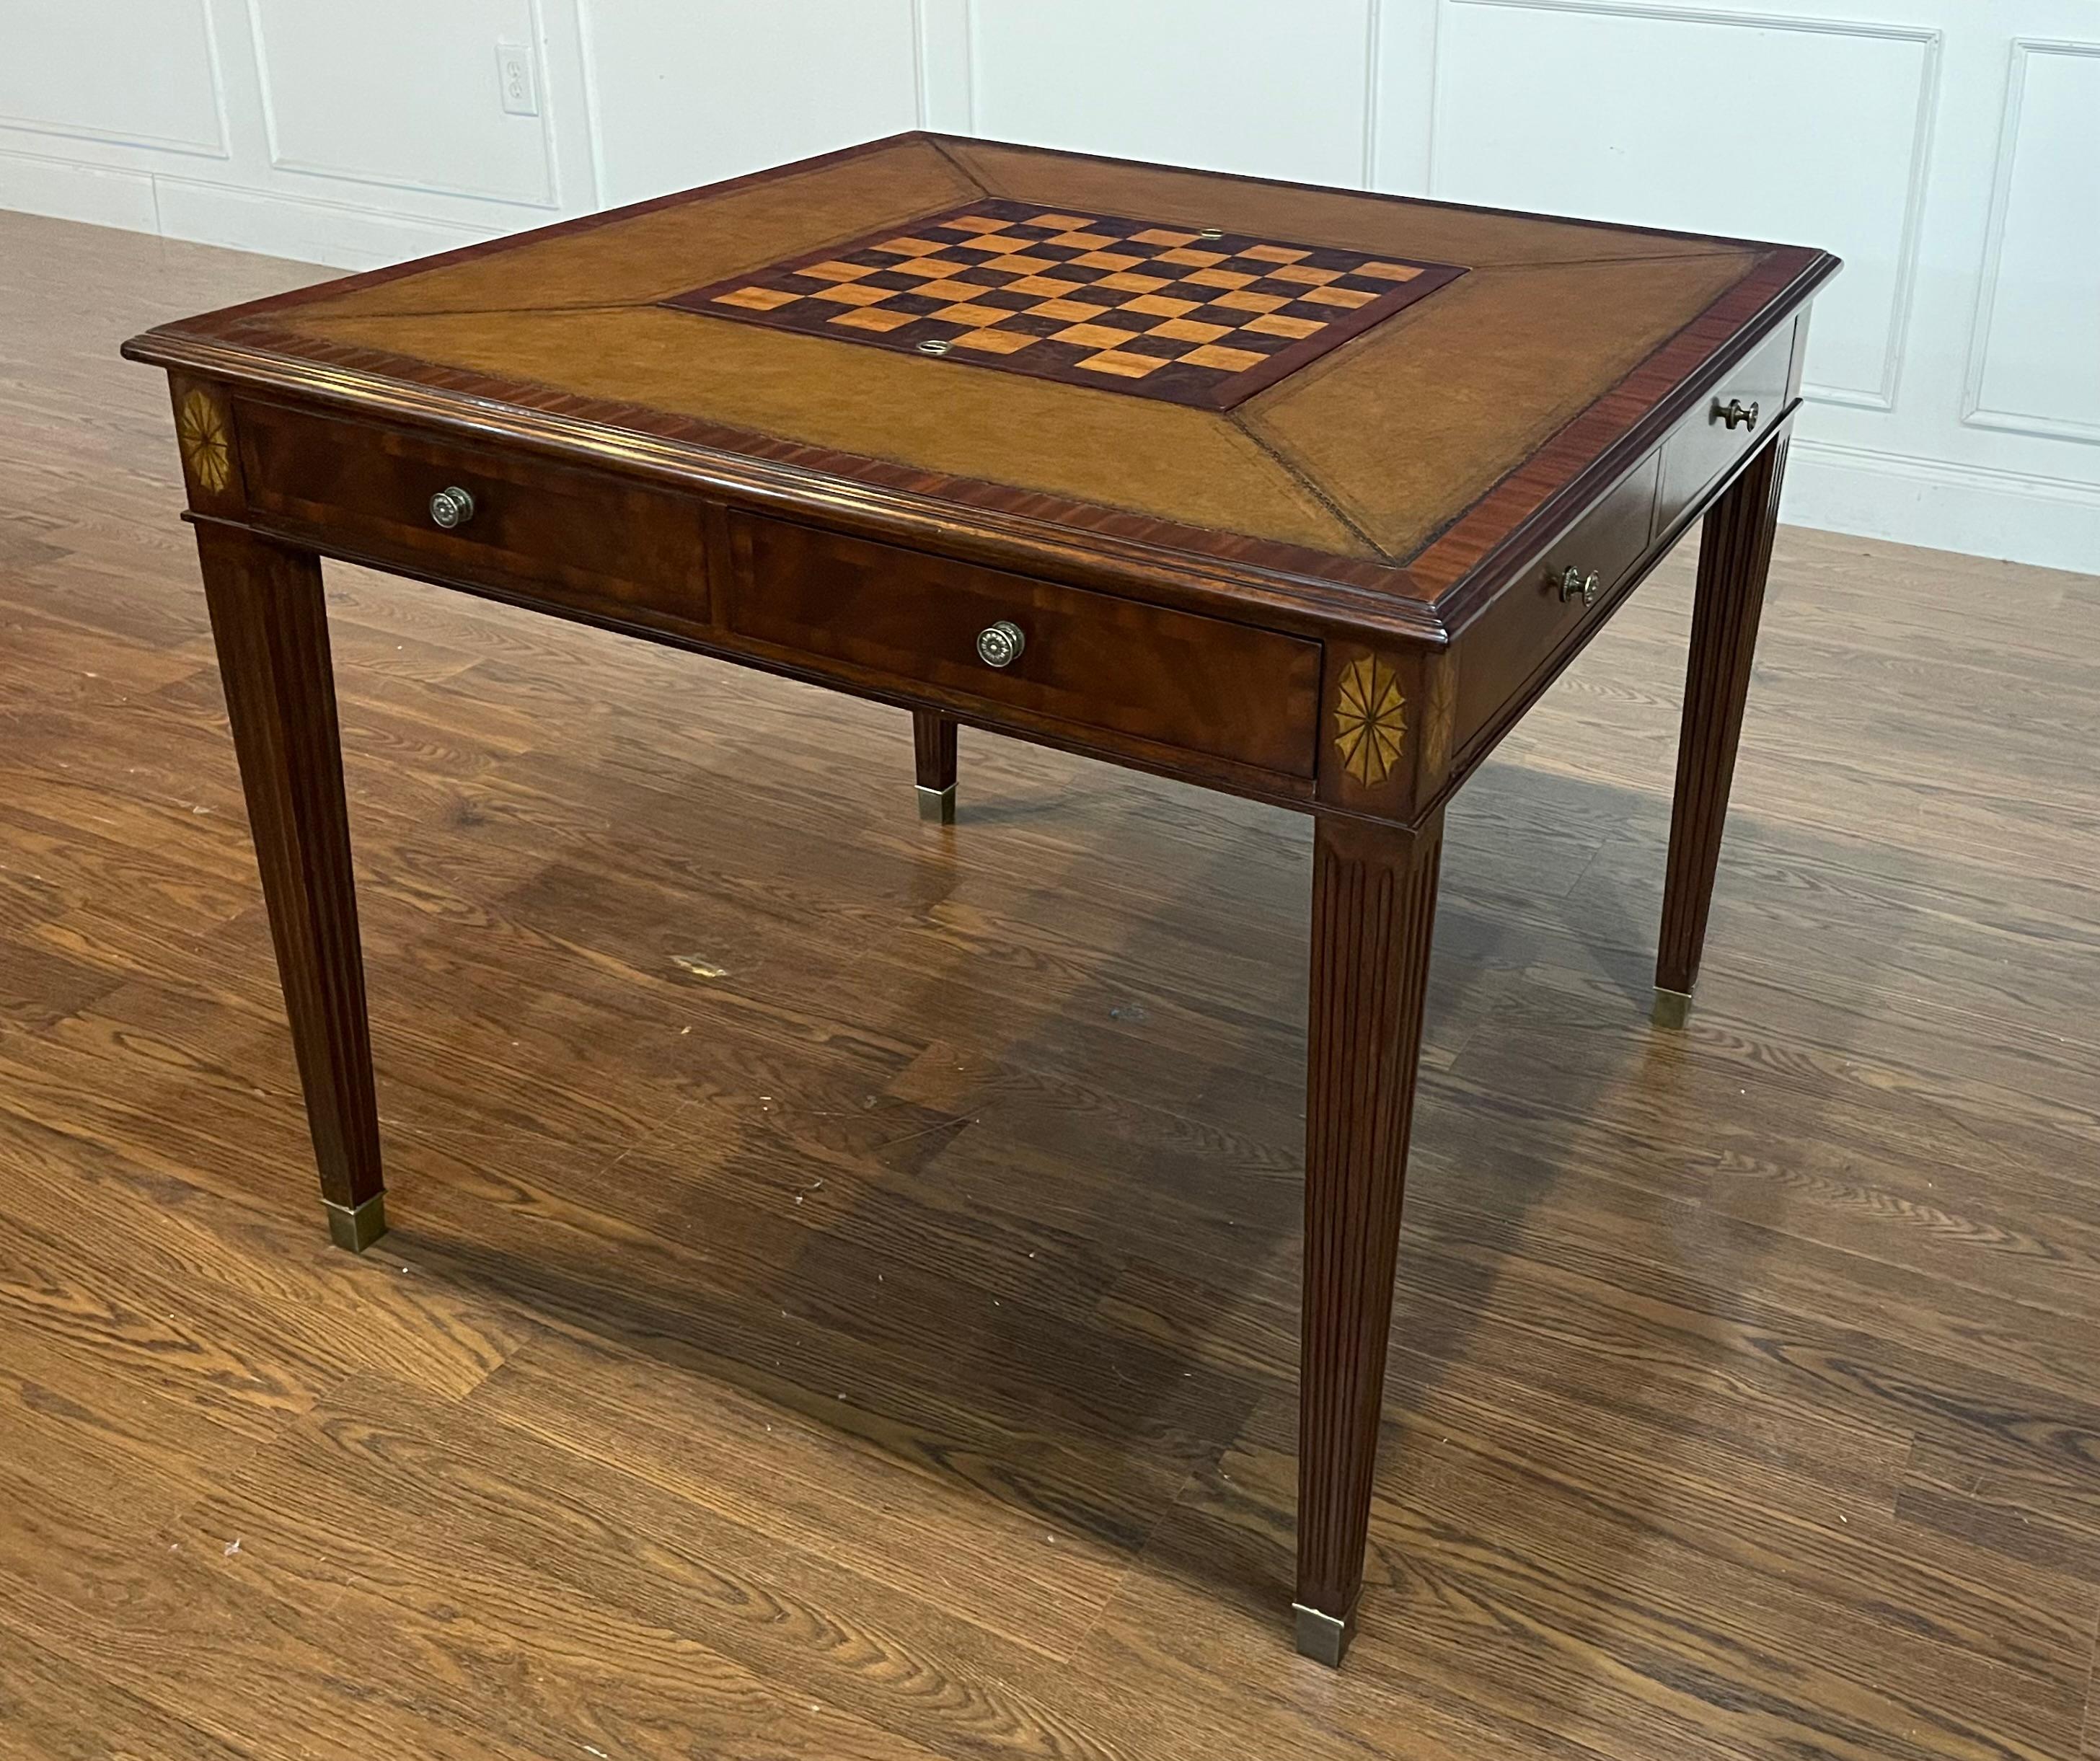 This is the English Classics traditional mahogany game table by Maitland Smith.  It is a showroom sample. It is 1-2 years old year and in very good condition. It features crotch mahogany drawer fronts, solid brass pulls, antique brown leather top,